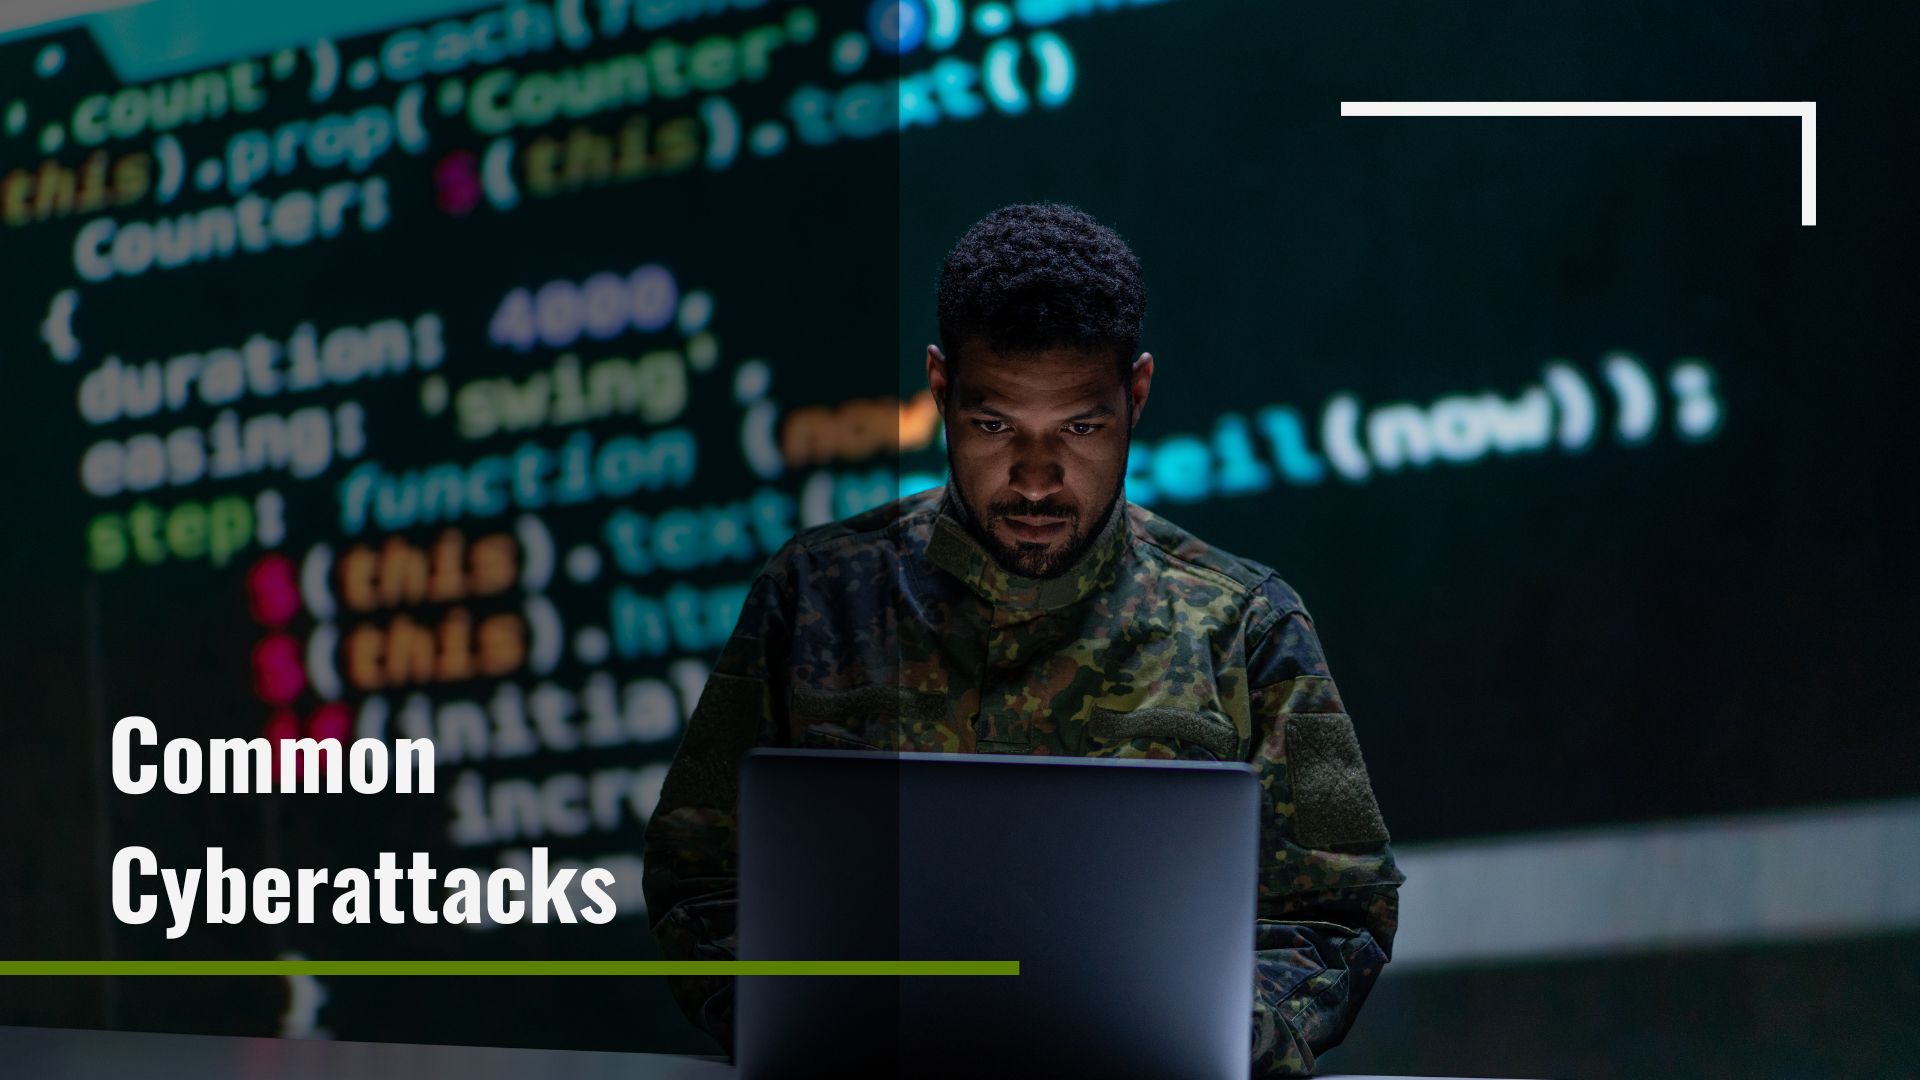 Most Common Types of Cyberattacks